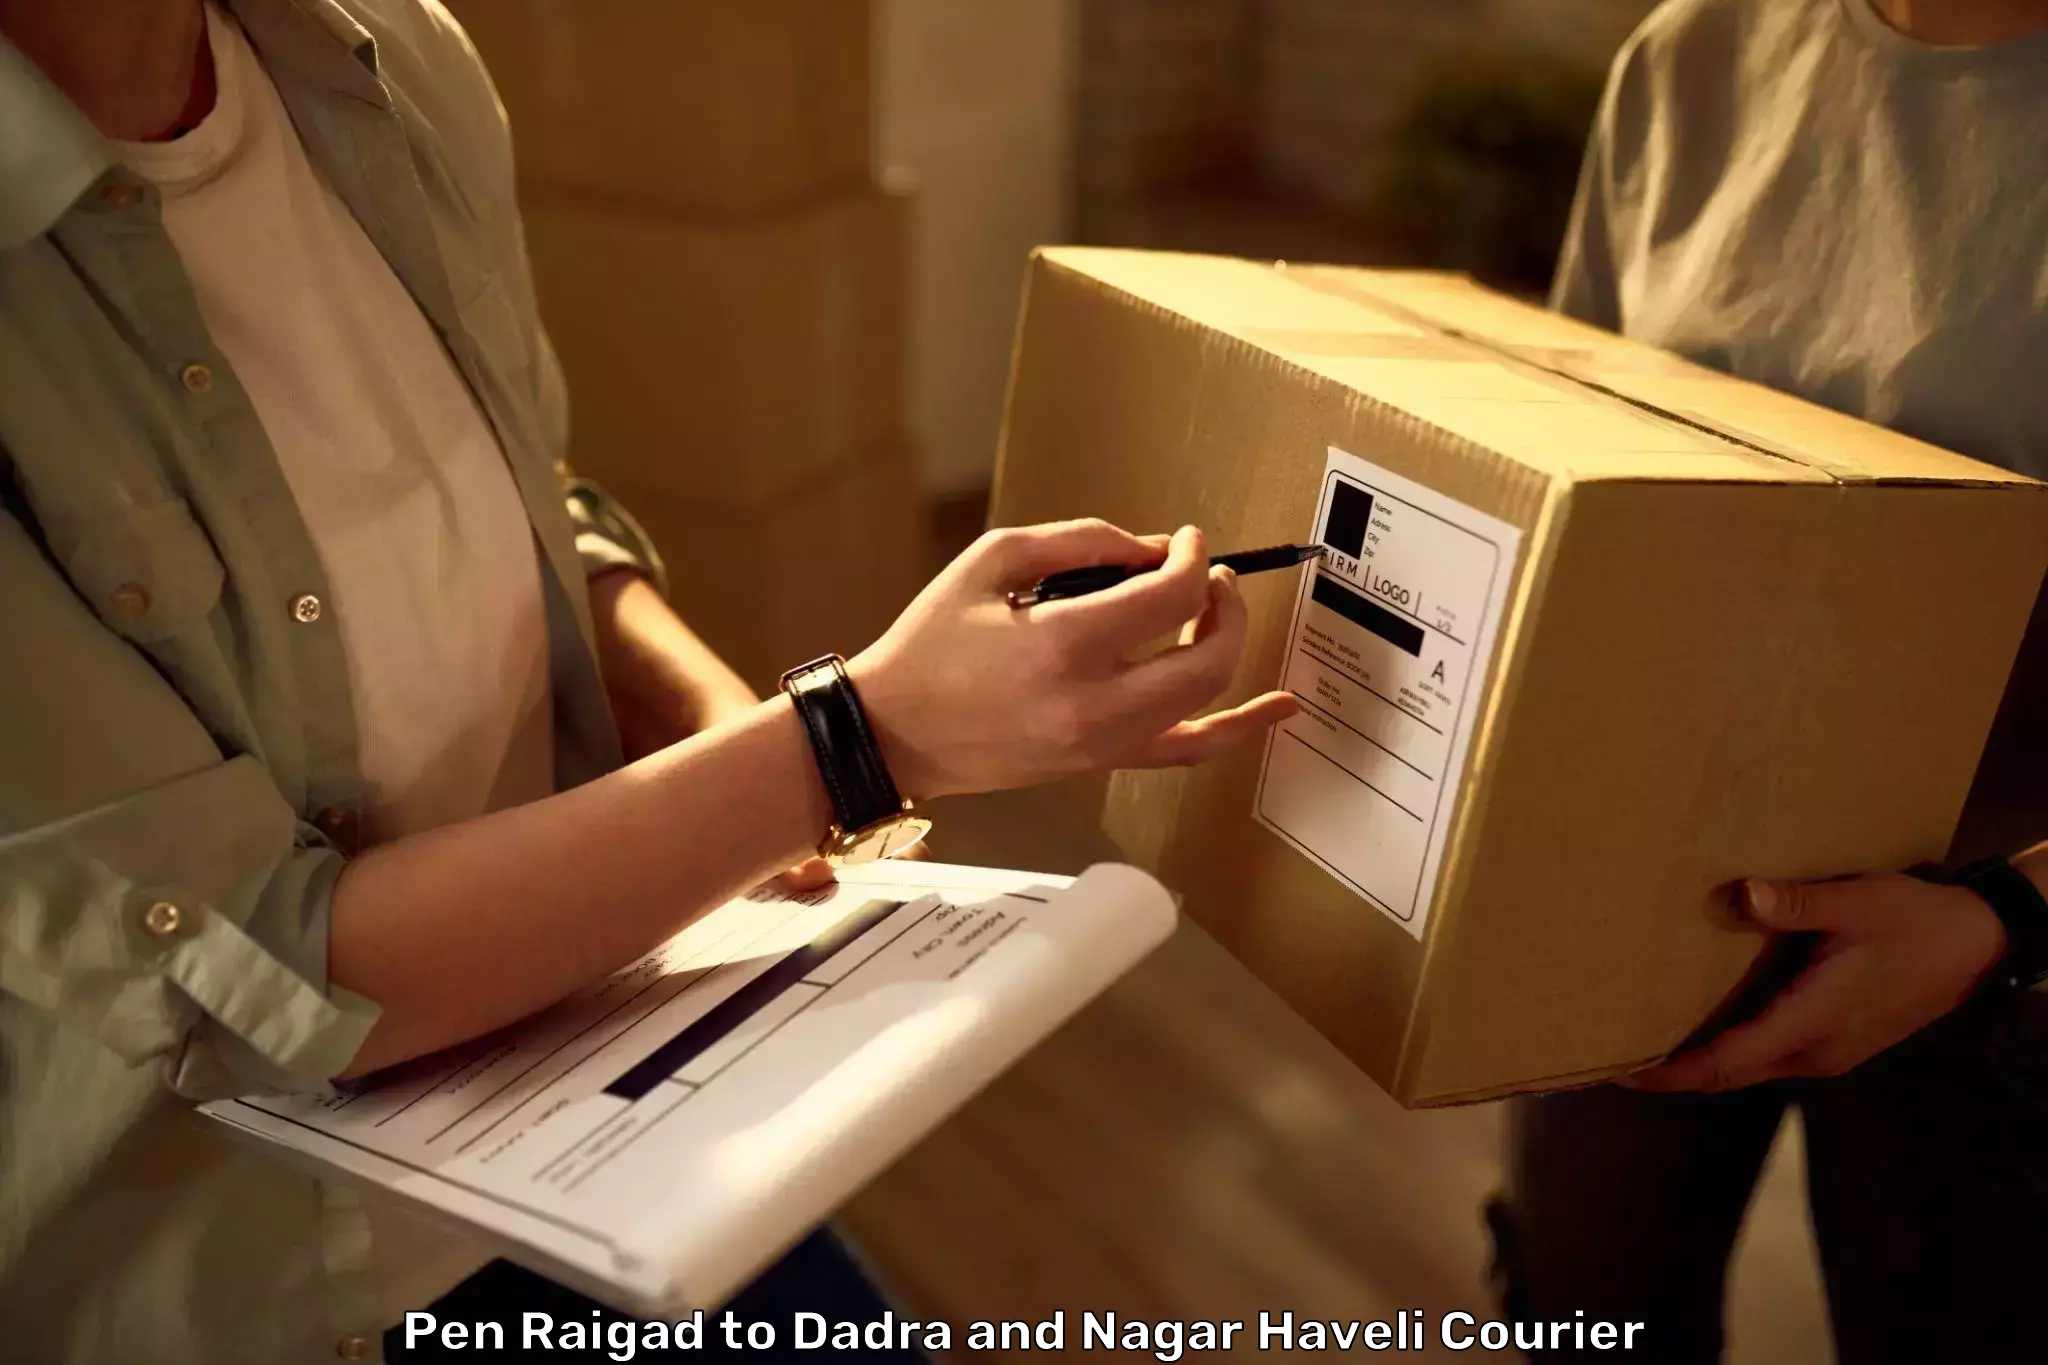 Luggage delivery system Pen Raigad to Dadra and Nagar Haveli